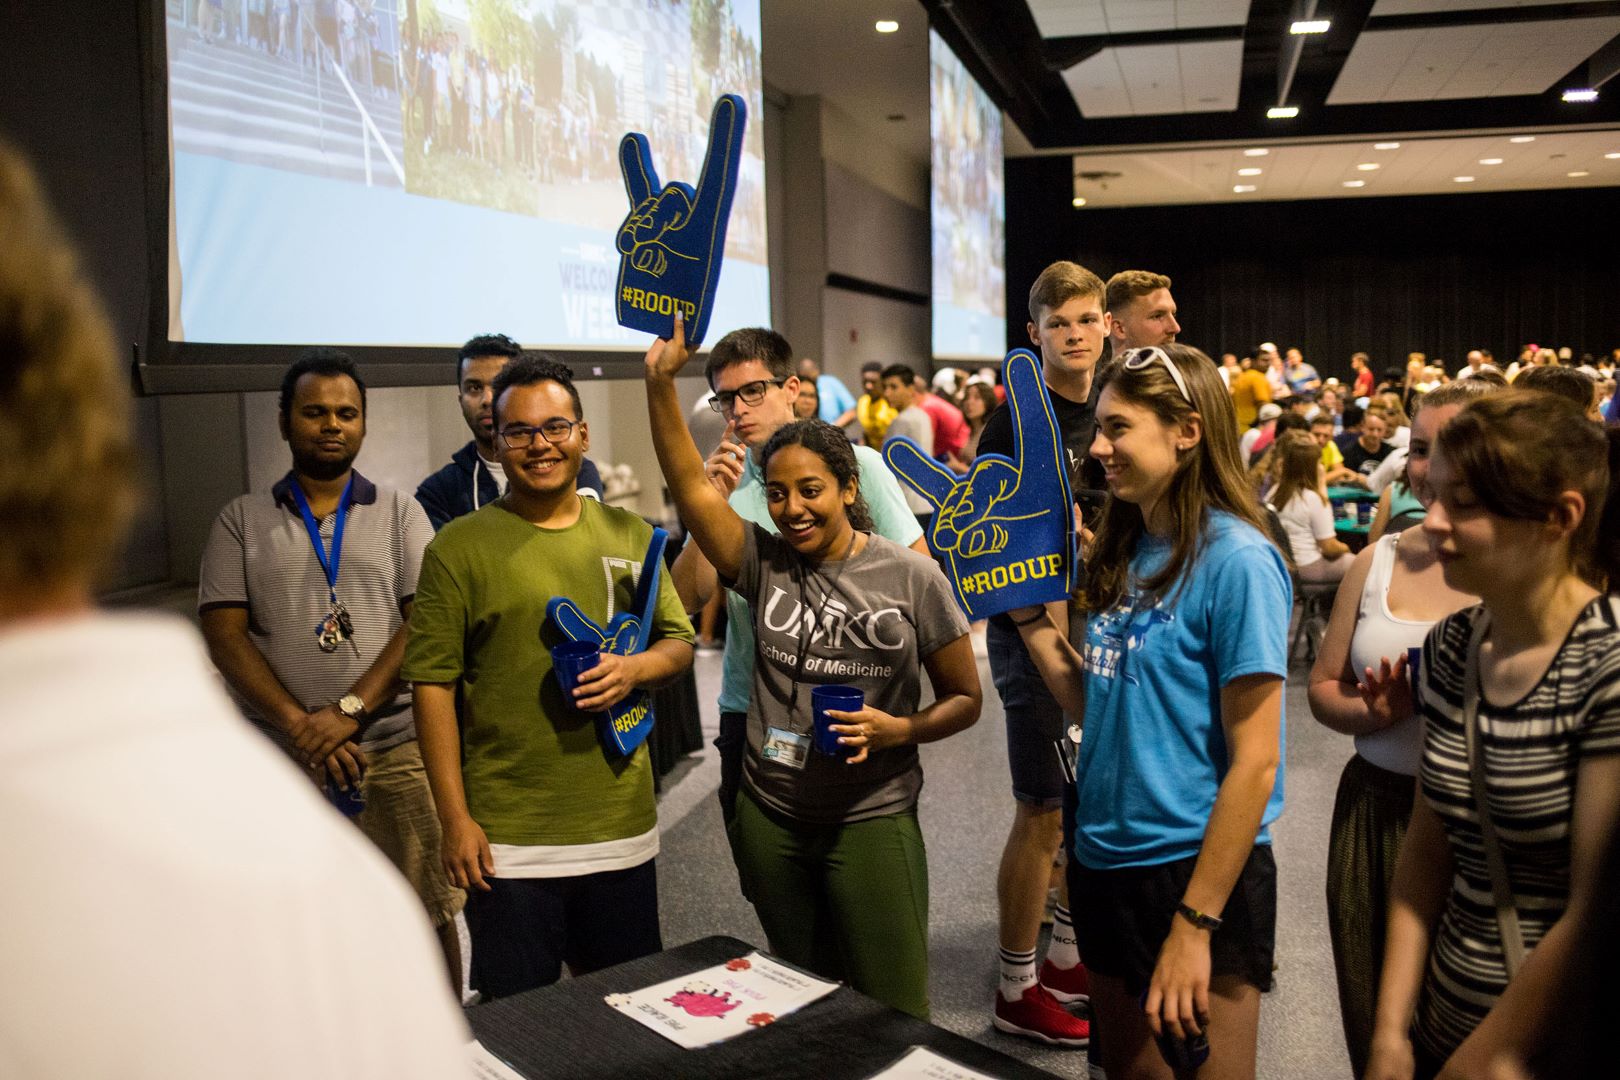 Students holding Roo Up foam fingers gather at a table in an auditorium while they wait for Orientation to begin